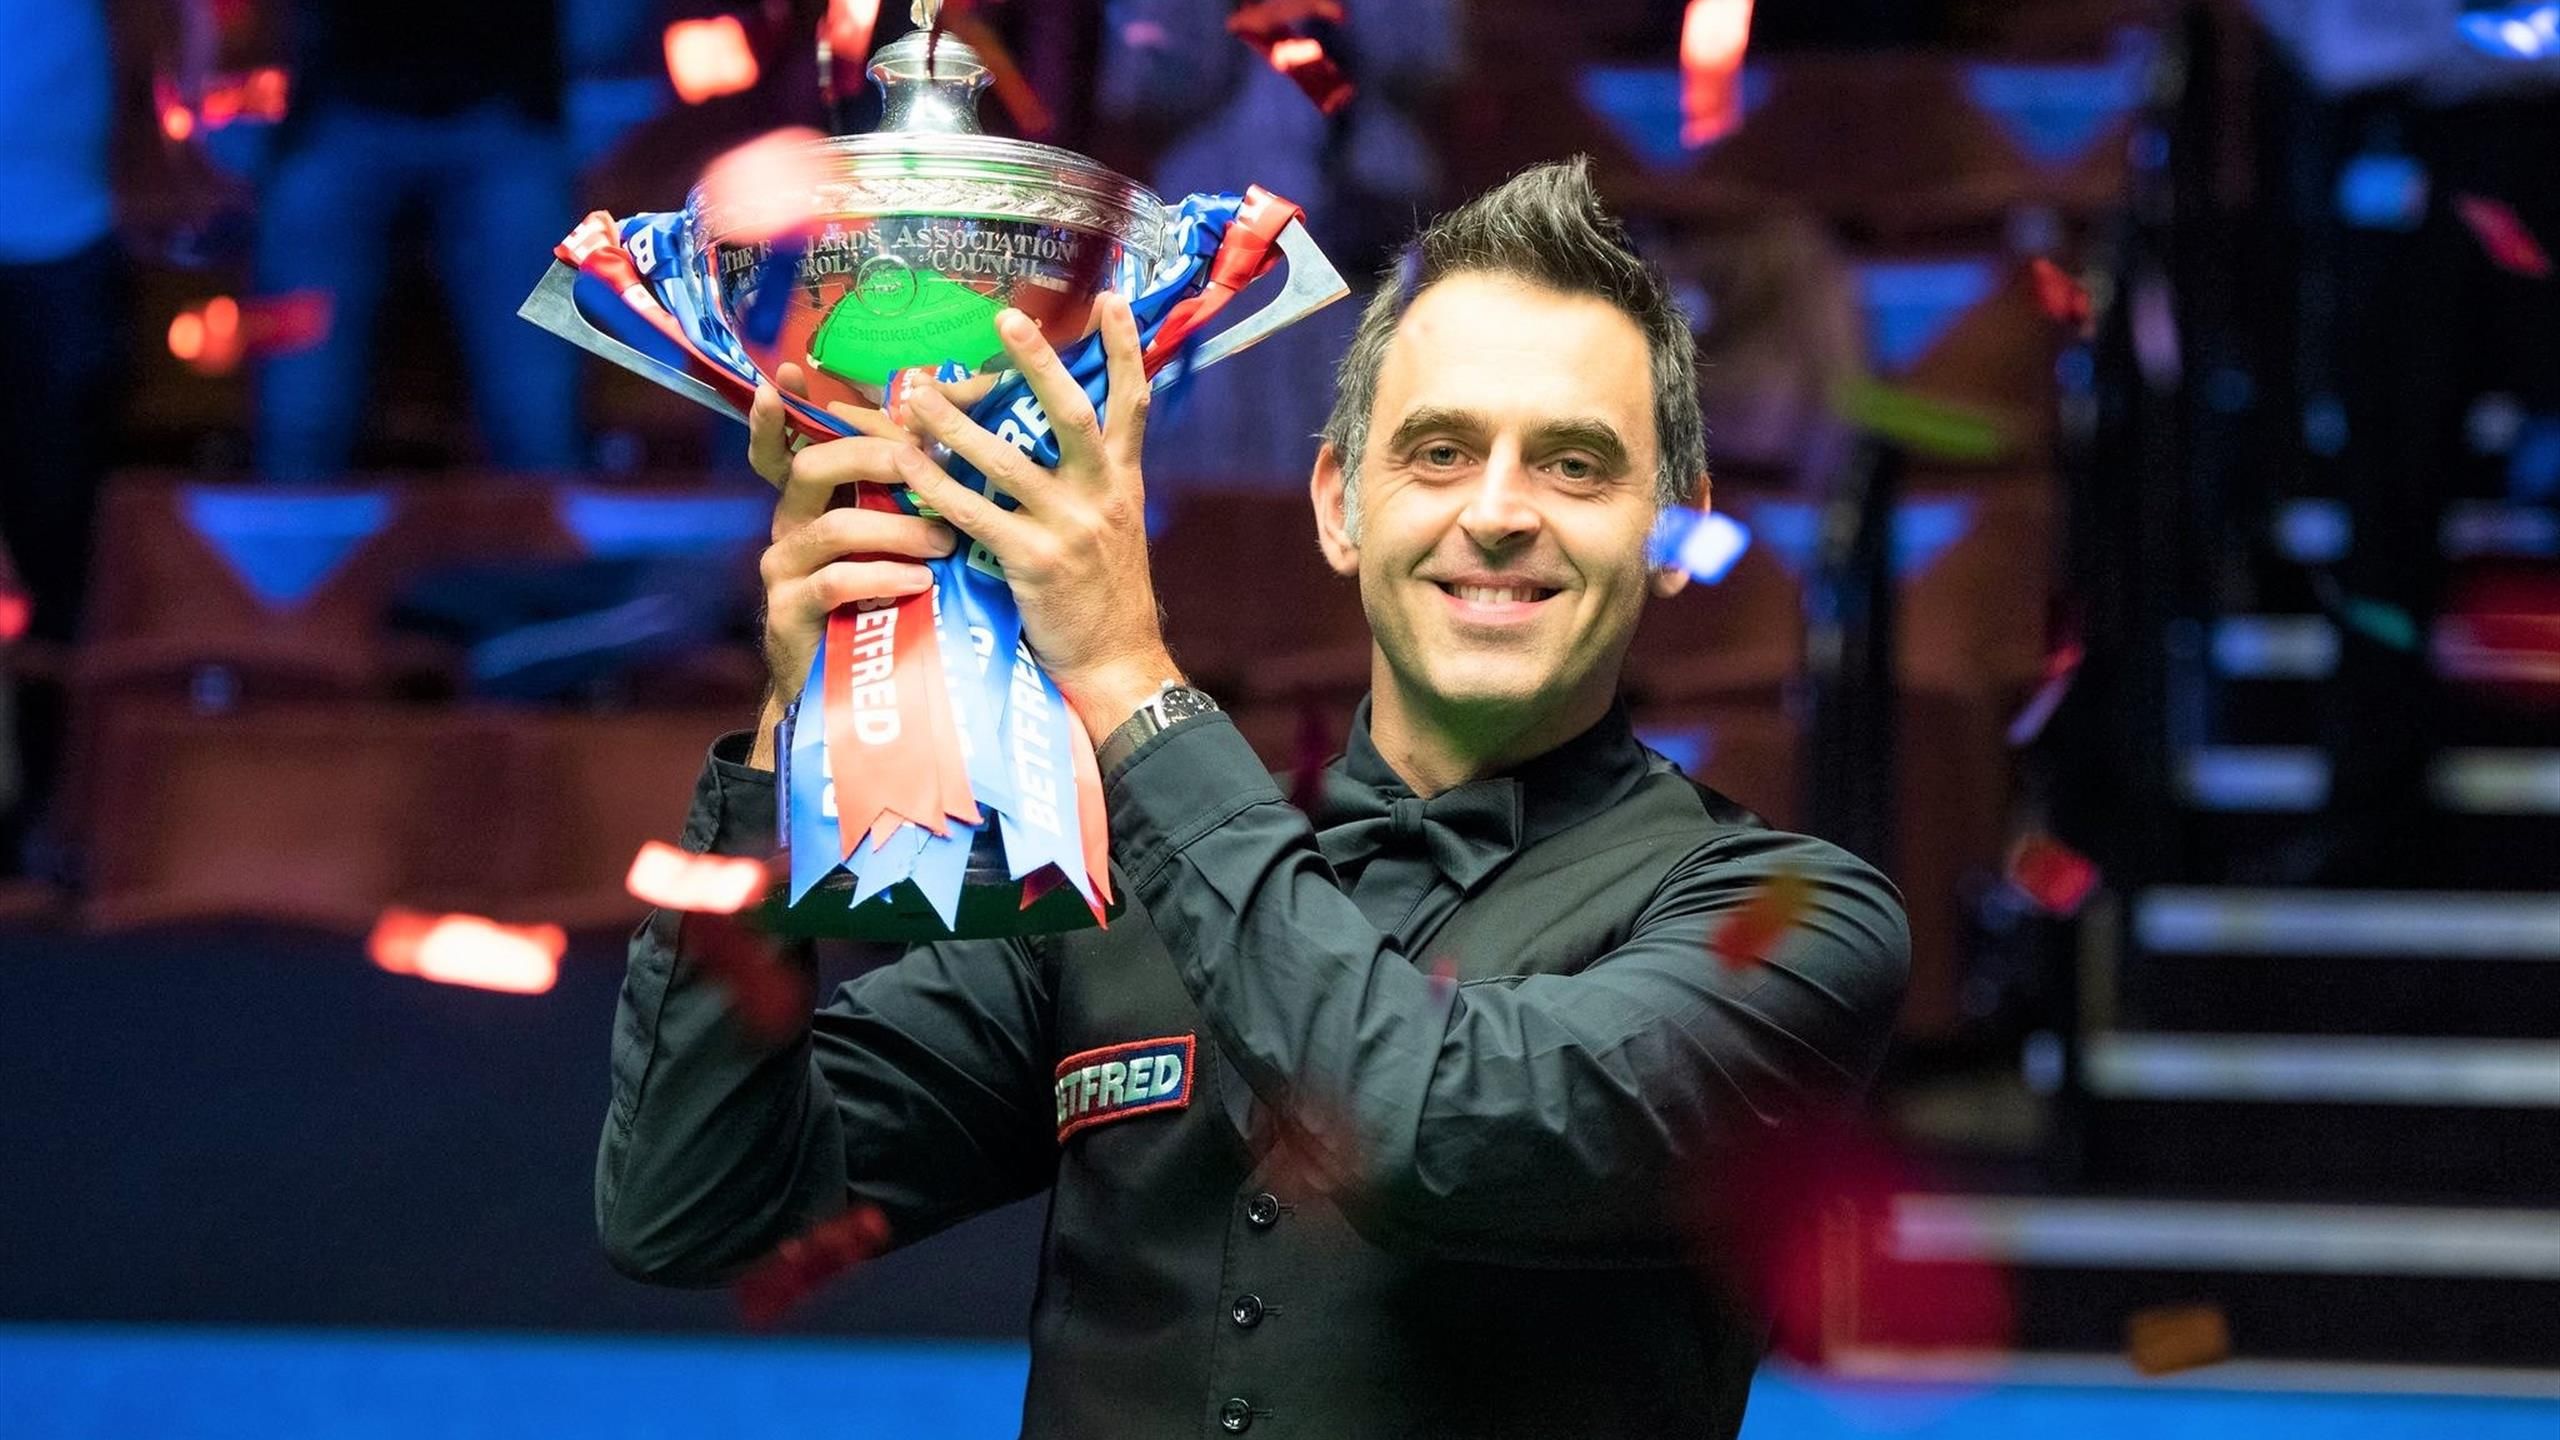 World Snooker Championship 2021 news - Watch the main draw live on Eurosport website and app